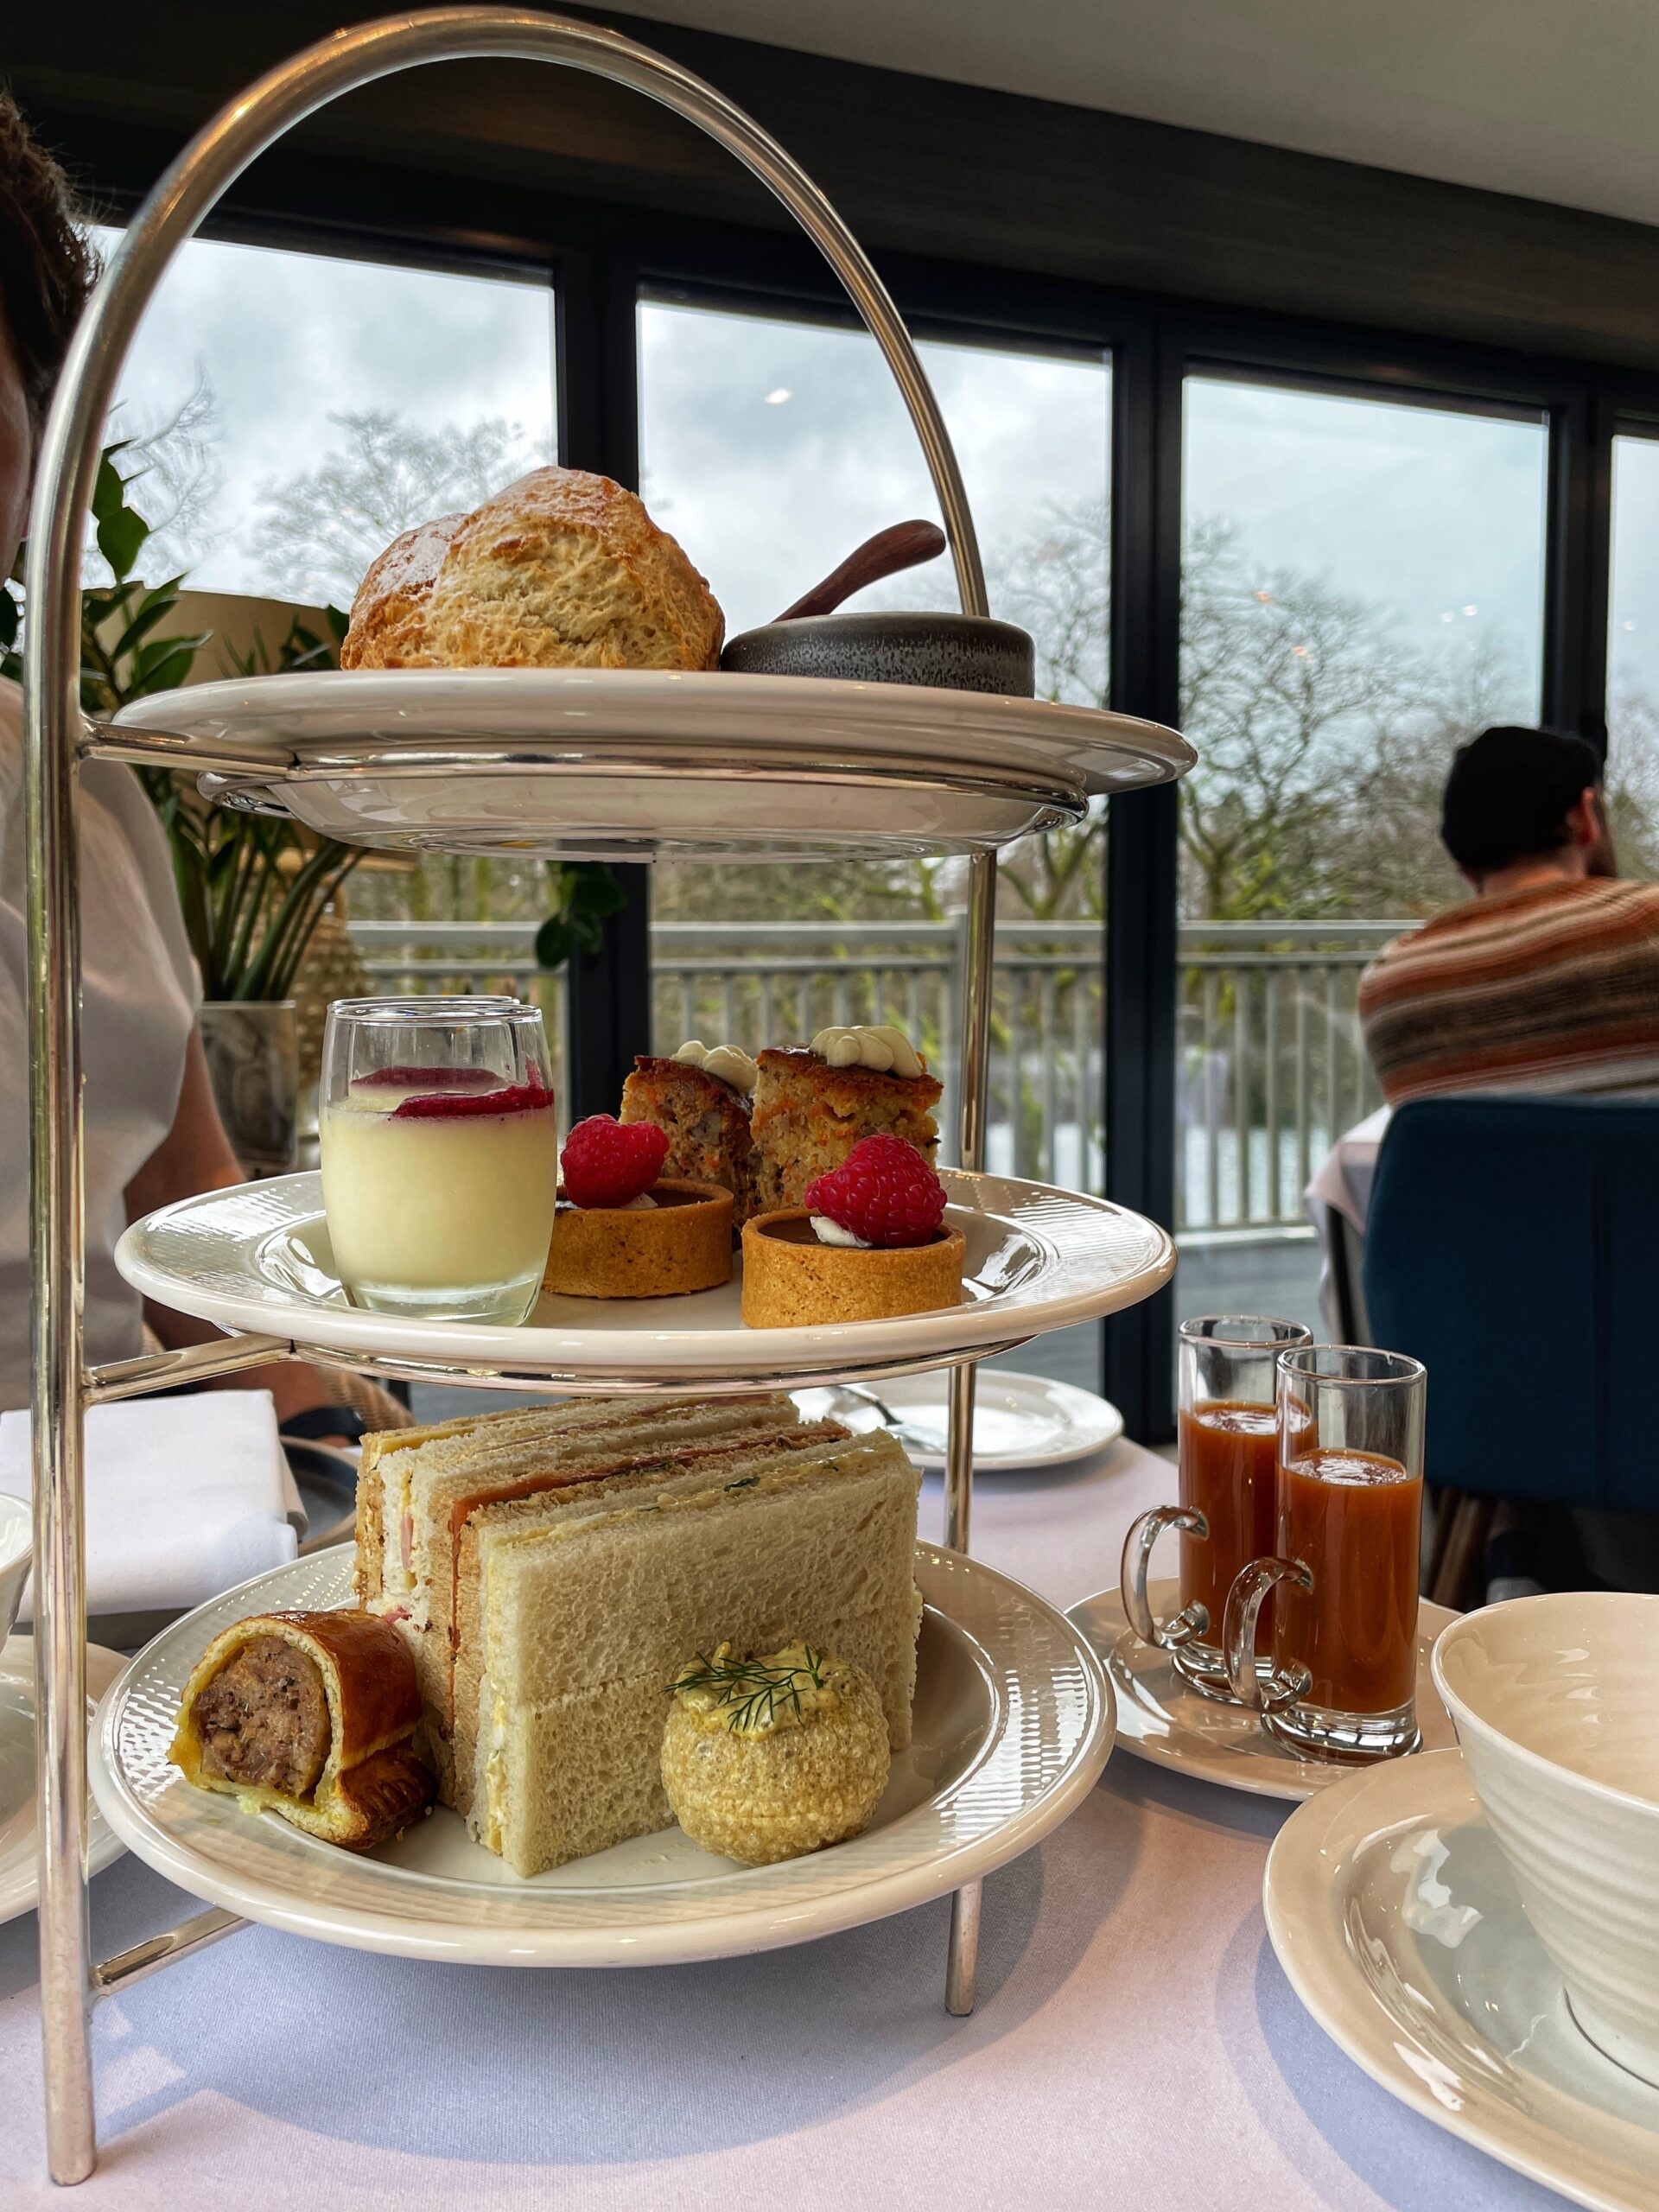 Afternoon tea at The Lake House